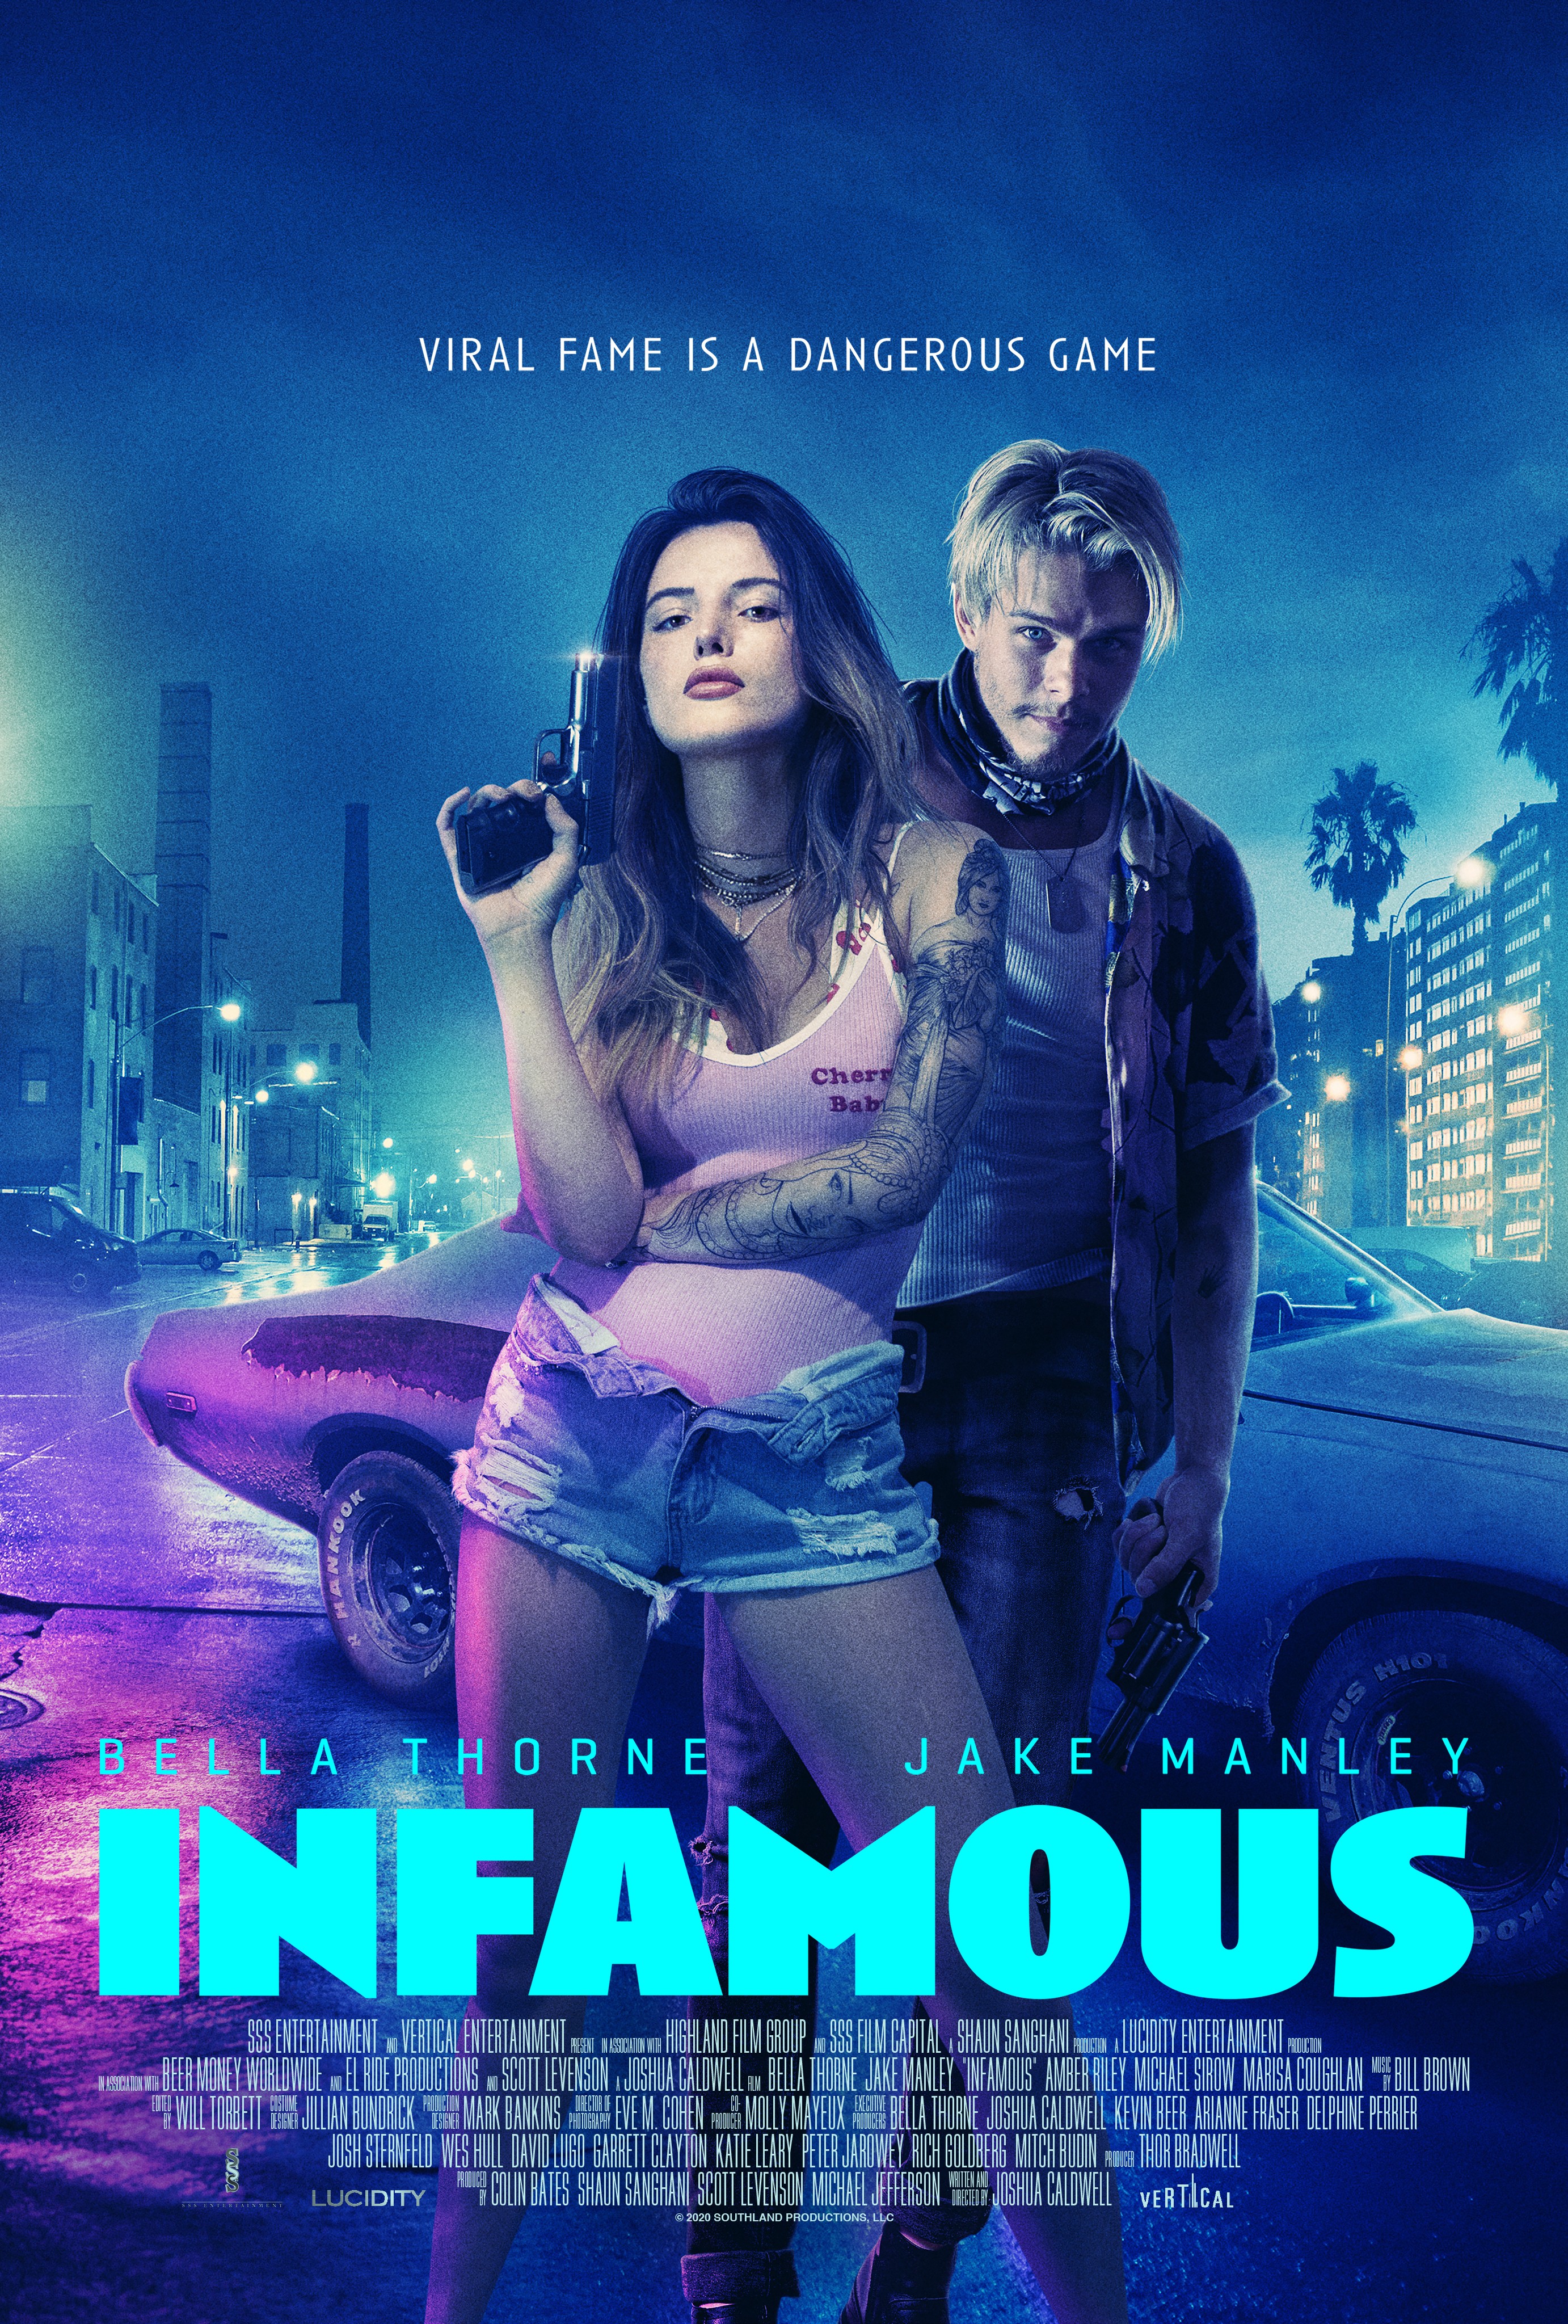 Bella Thorne Infamous Movie Wallpapers